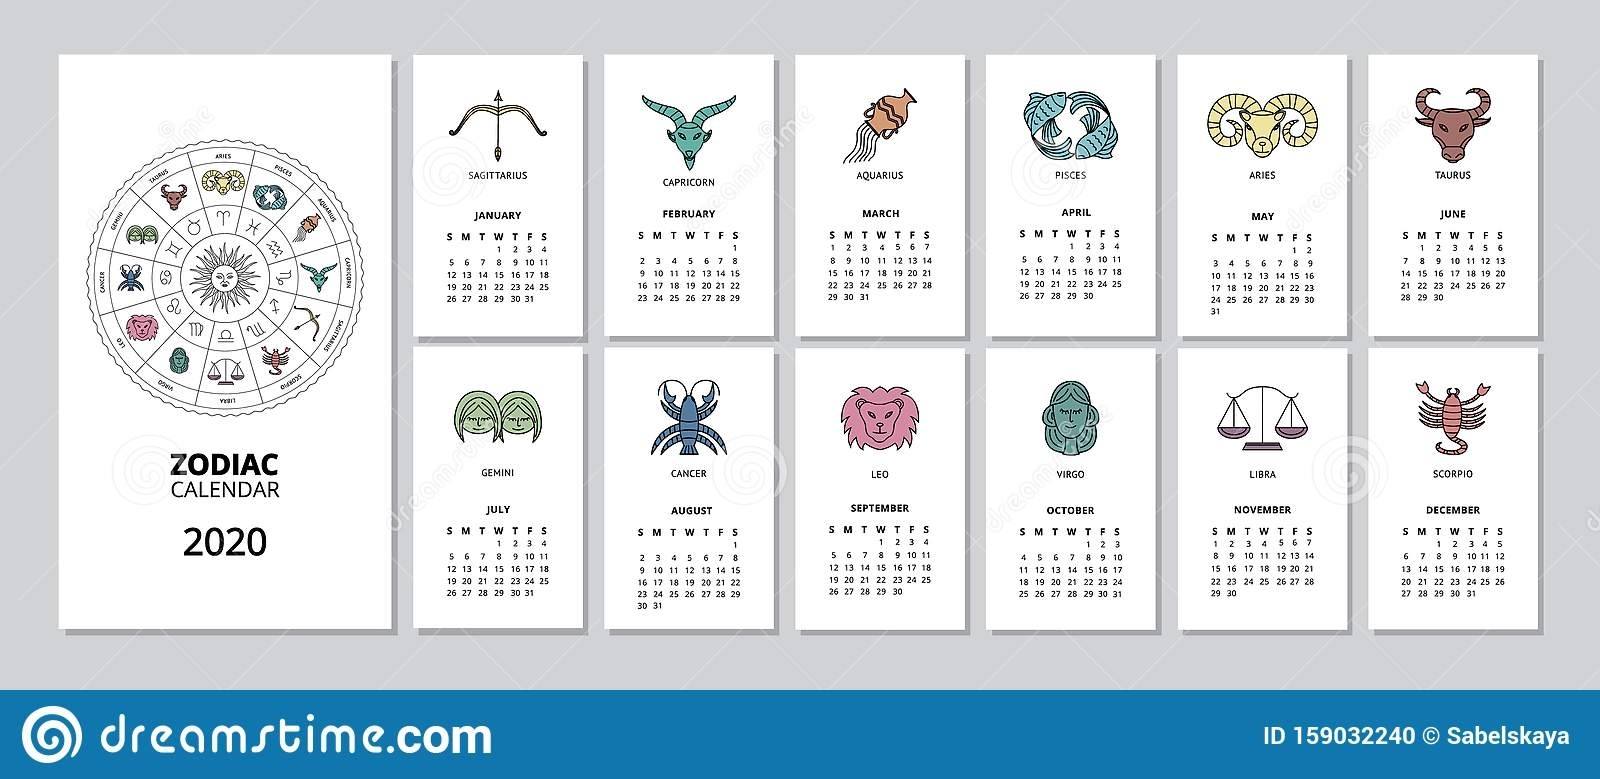 2020 Monthly Zodiac Calendar With Star Sign Page For Every